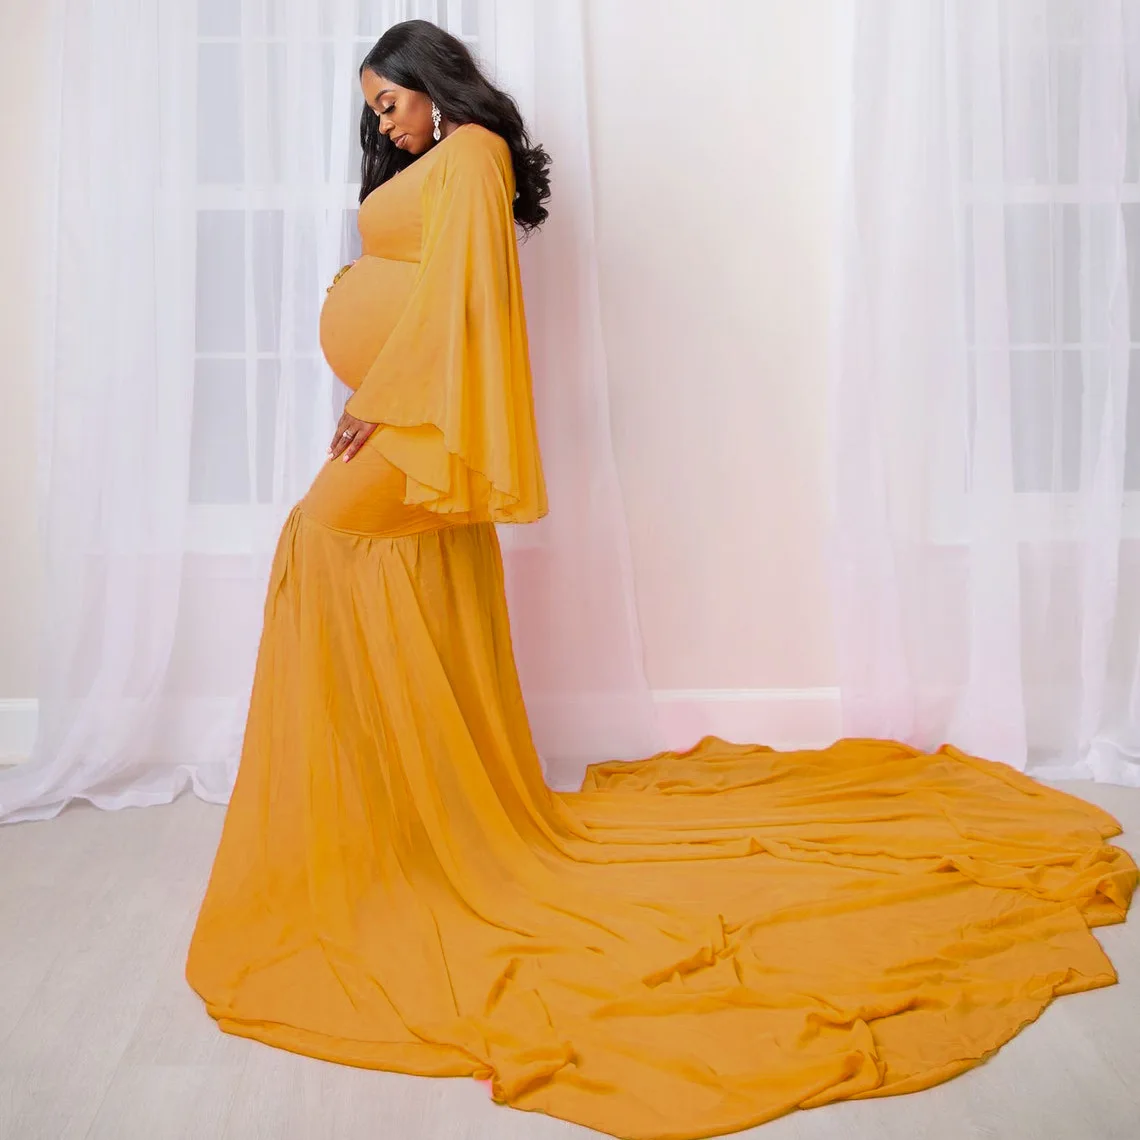 Sexy Maternity Dresses Photo Shoot Ruffle V-Neck Pregnancy Maxi Gown Photography Props Mermaid Tail Long Pregnant Women Dress enlarge